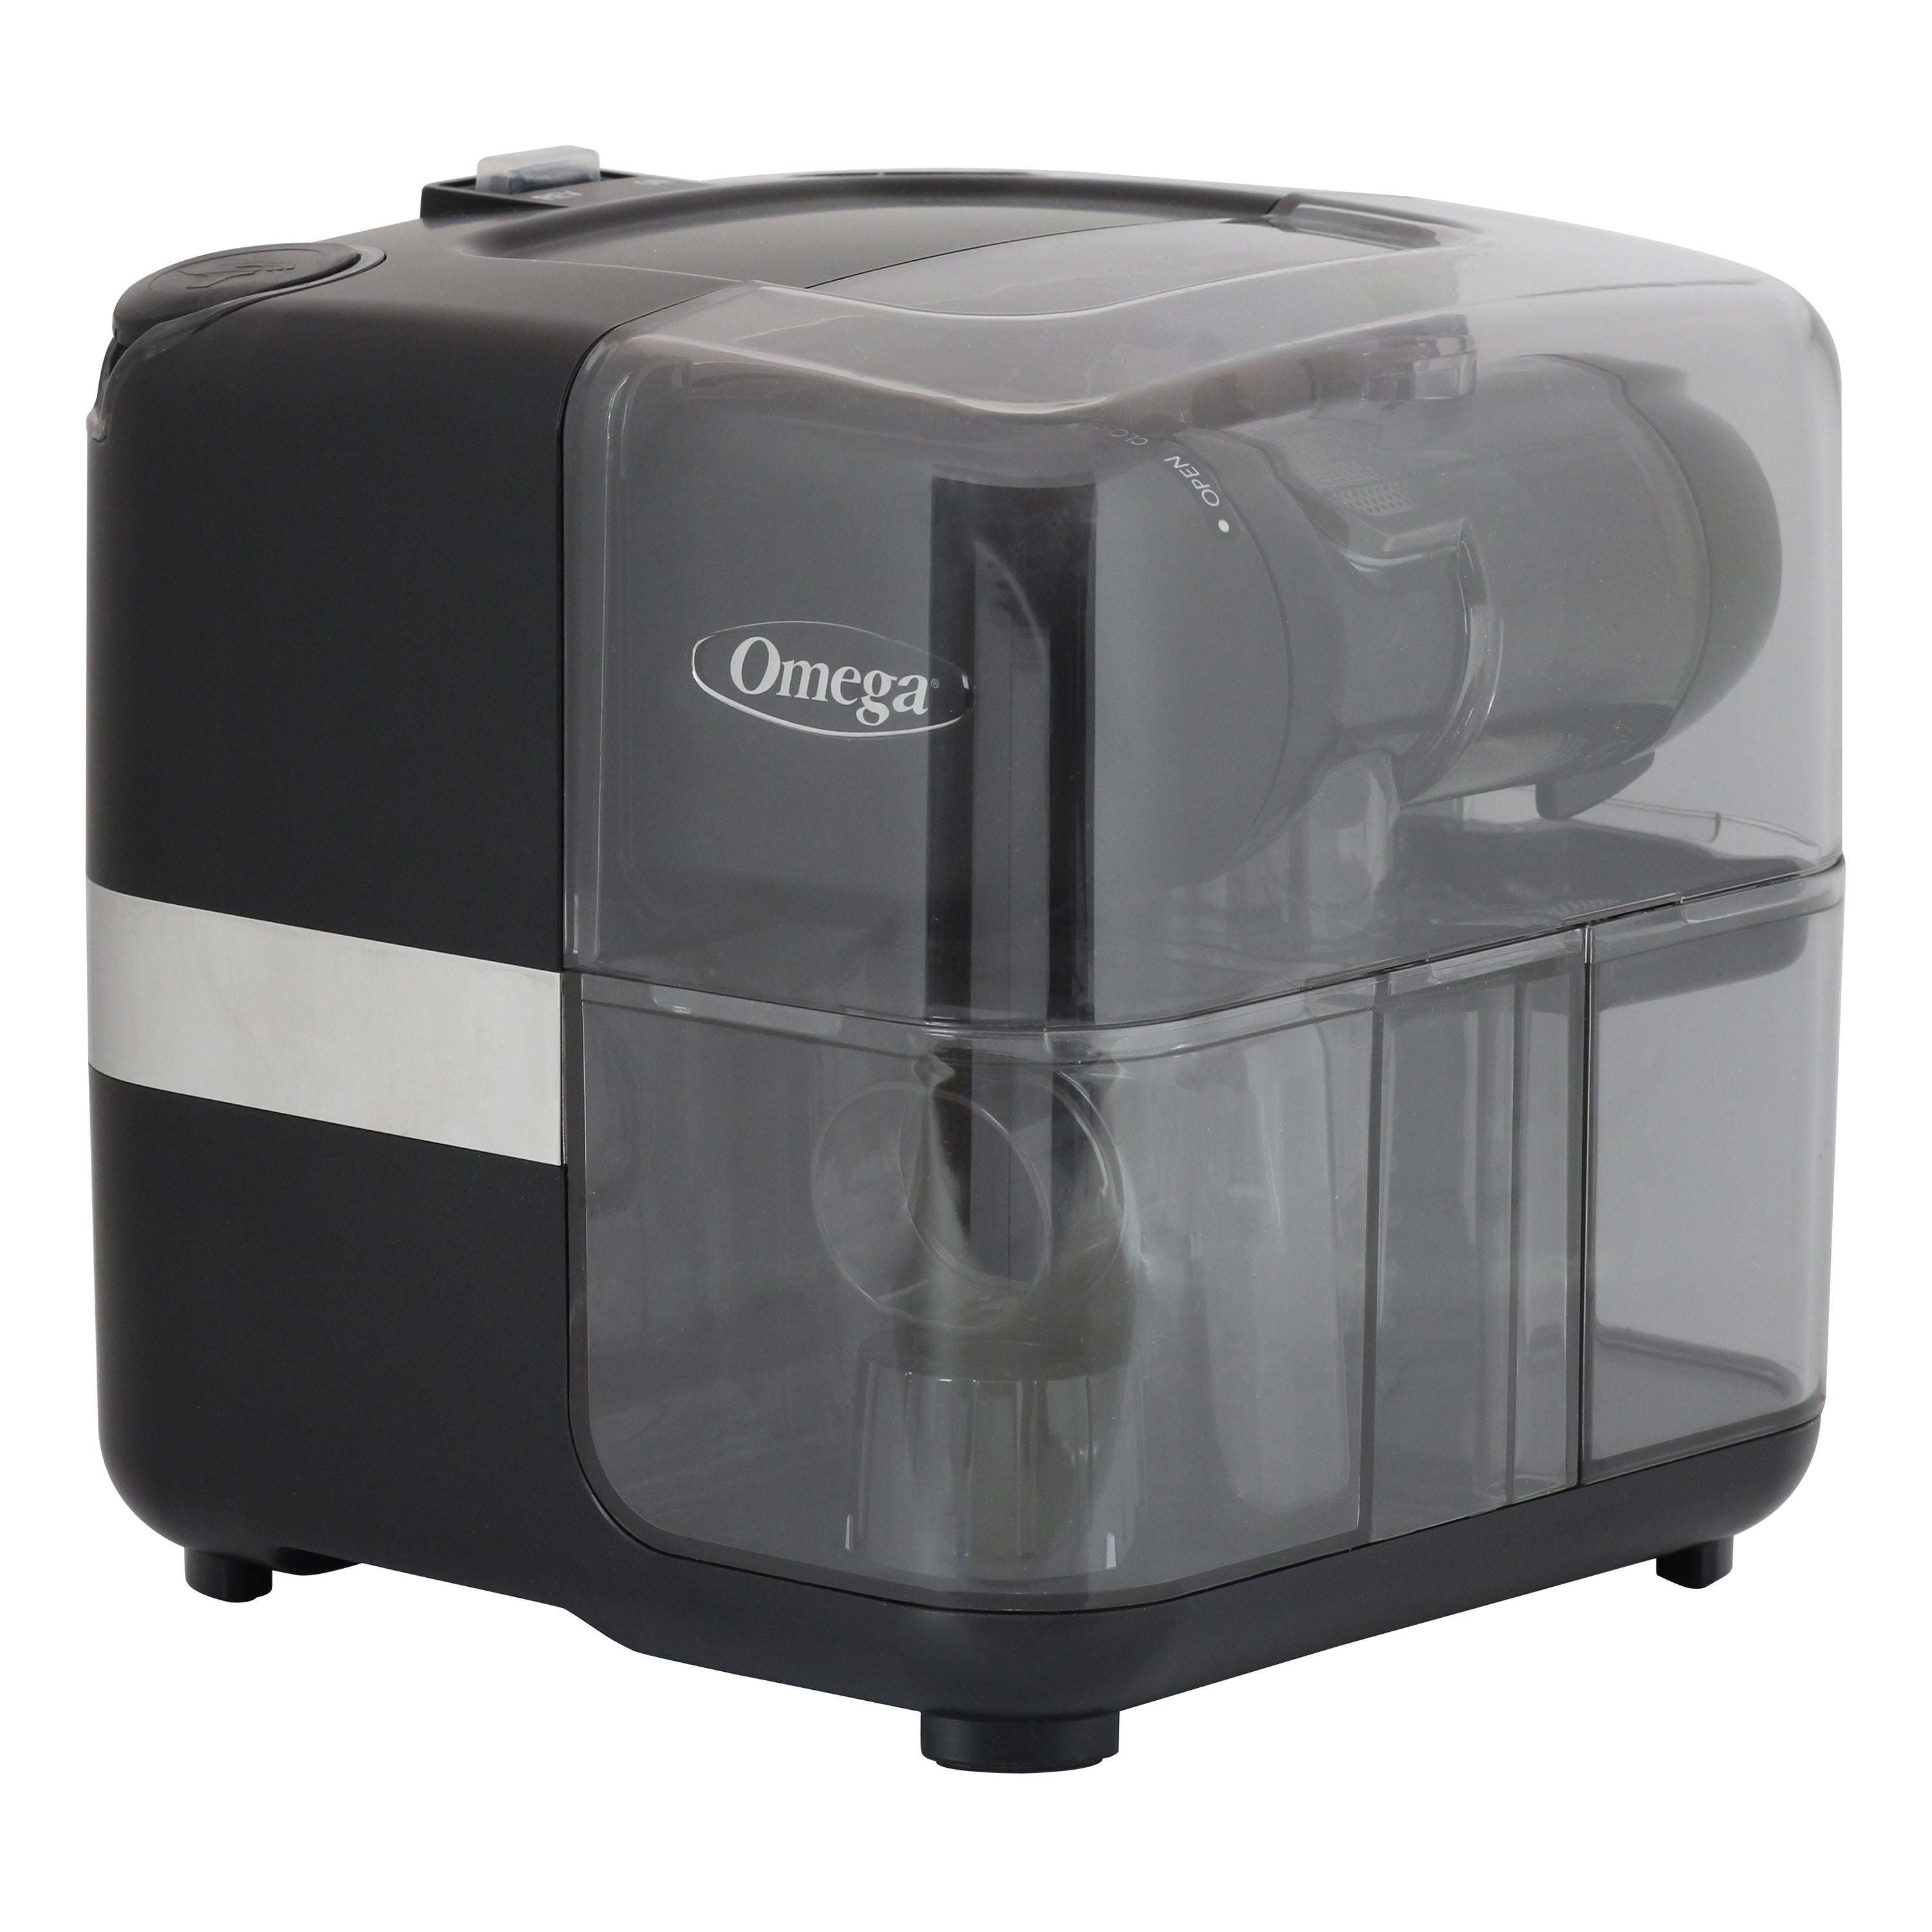 Omega - JCUBE2MB13, Omega Cold Press 365 Masticating Slow Juicer and Nutrition System with On-Board Storage, in Matte Black